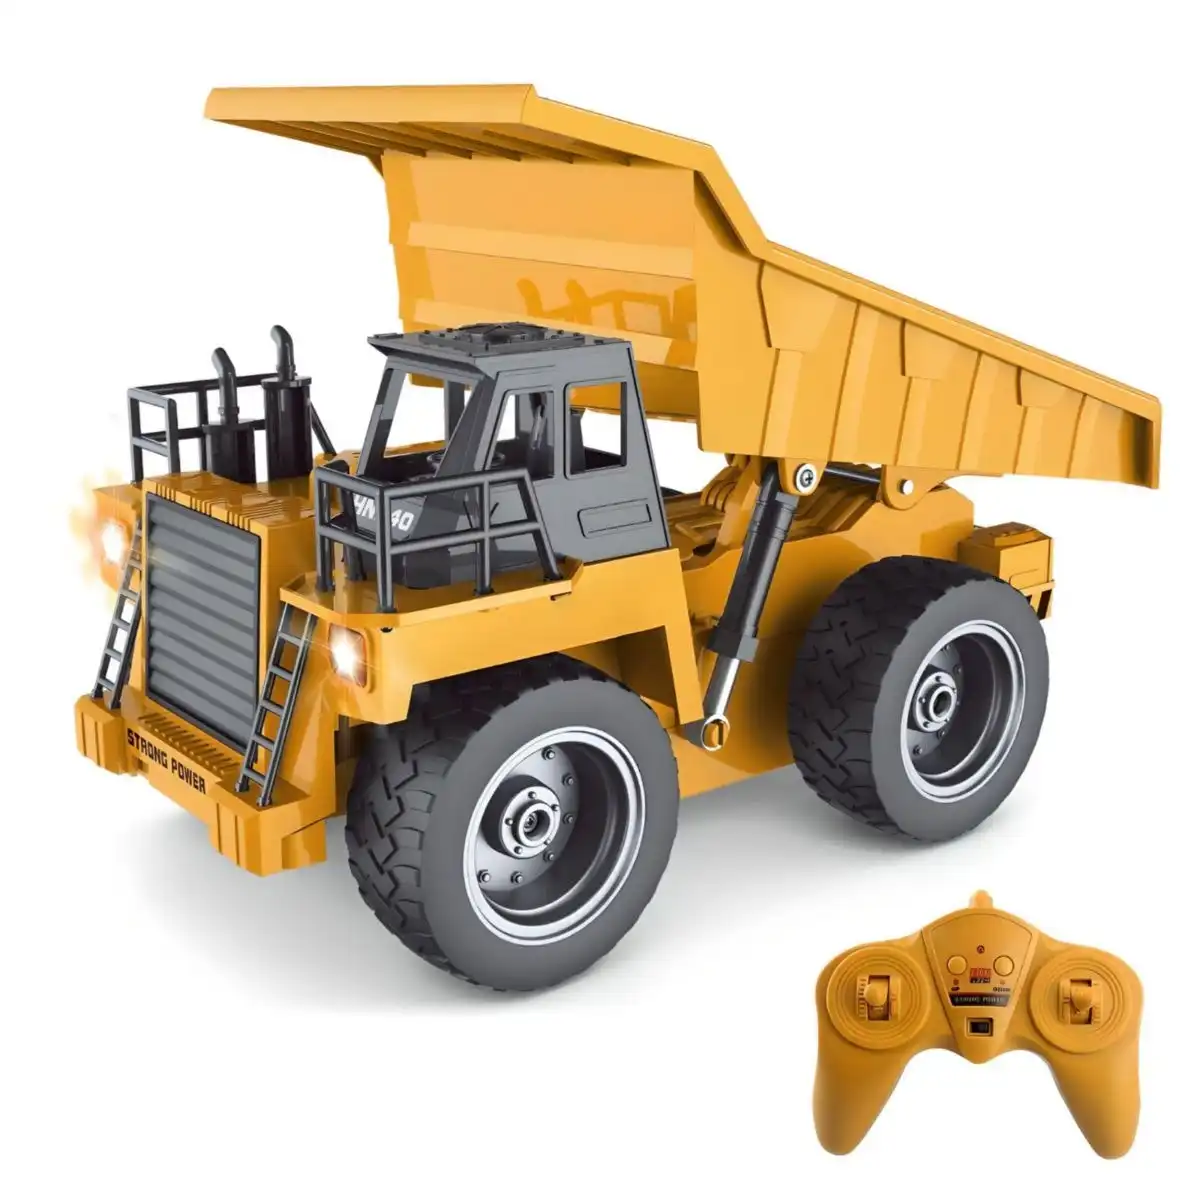 Kidst PowerDrive Dump Truck Realistic RC Construction Play for Budding Builders